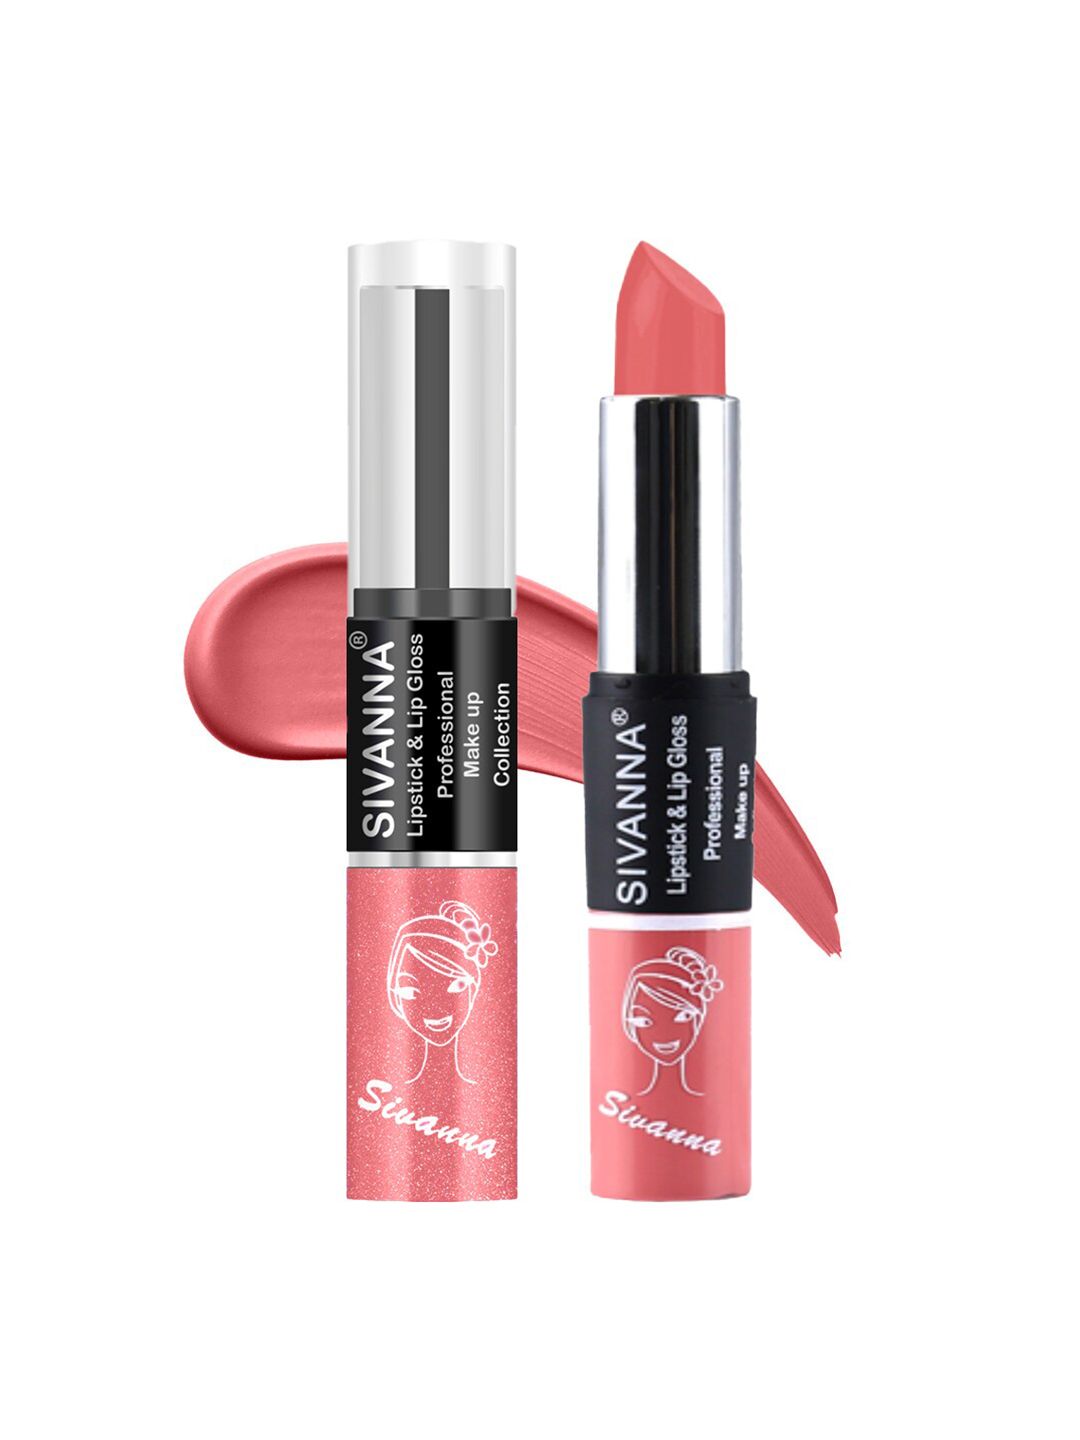 Sivanna Colors 2-in-1 Professional Makeup Lipstick & Lip Gloss - DK061 24 Price in India